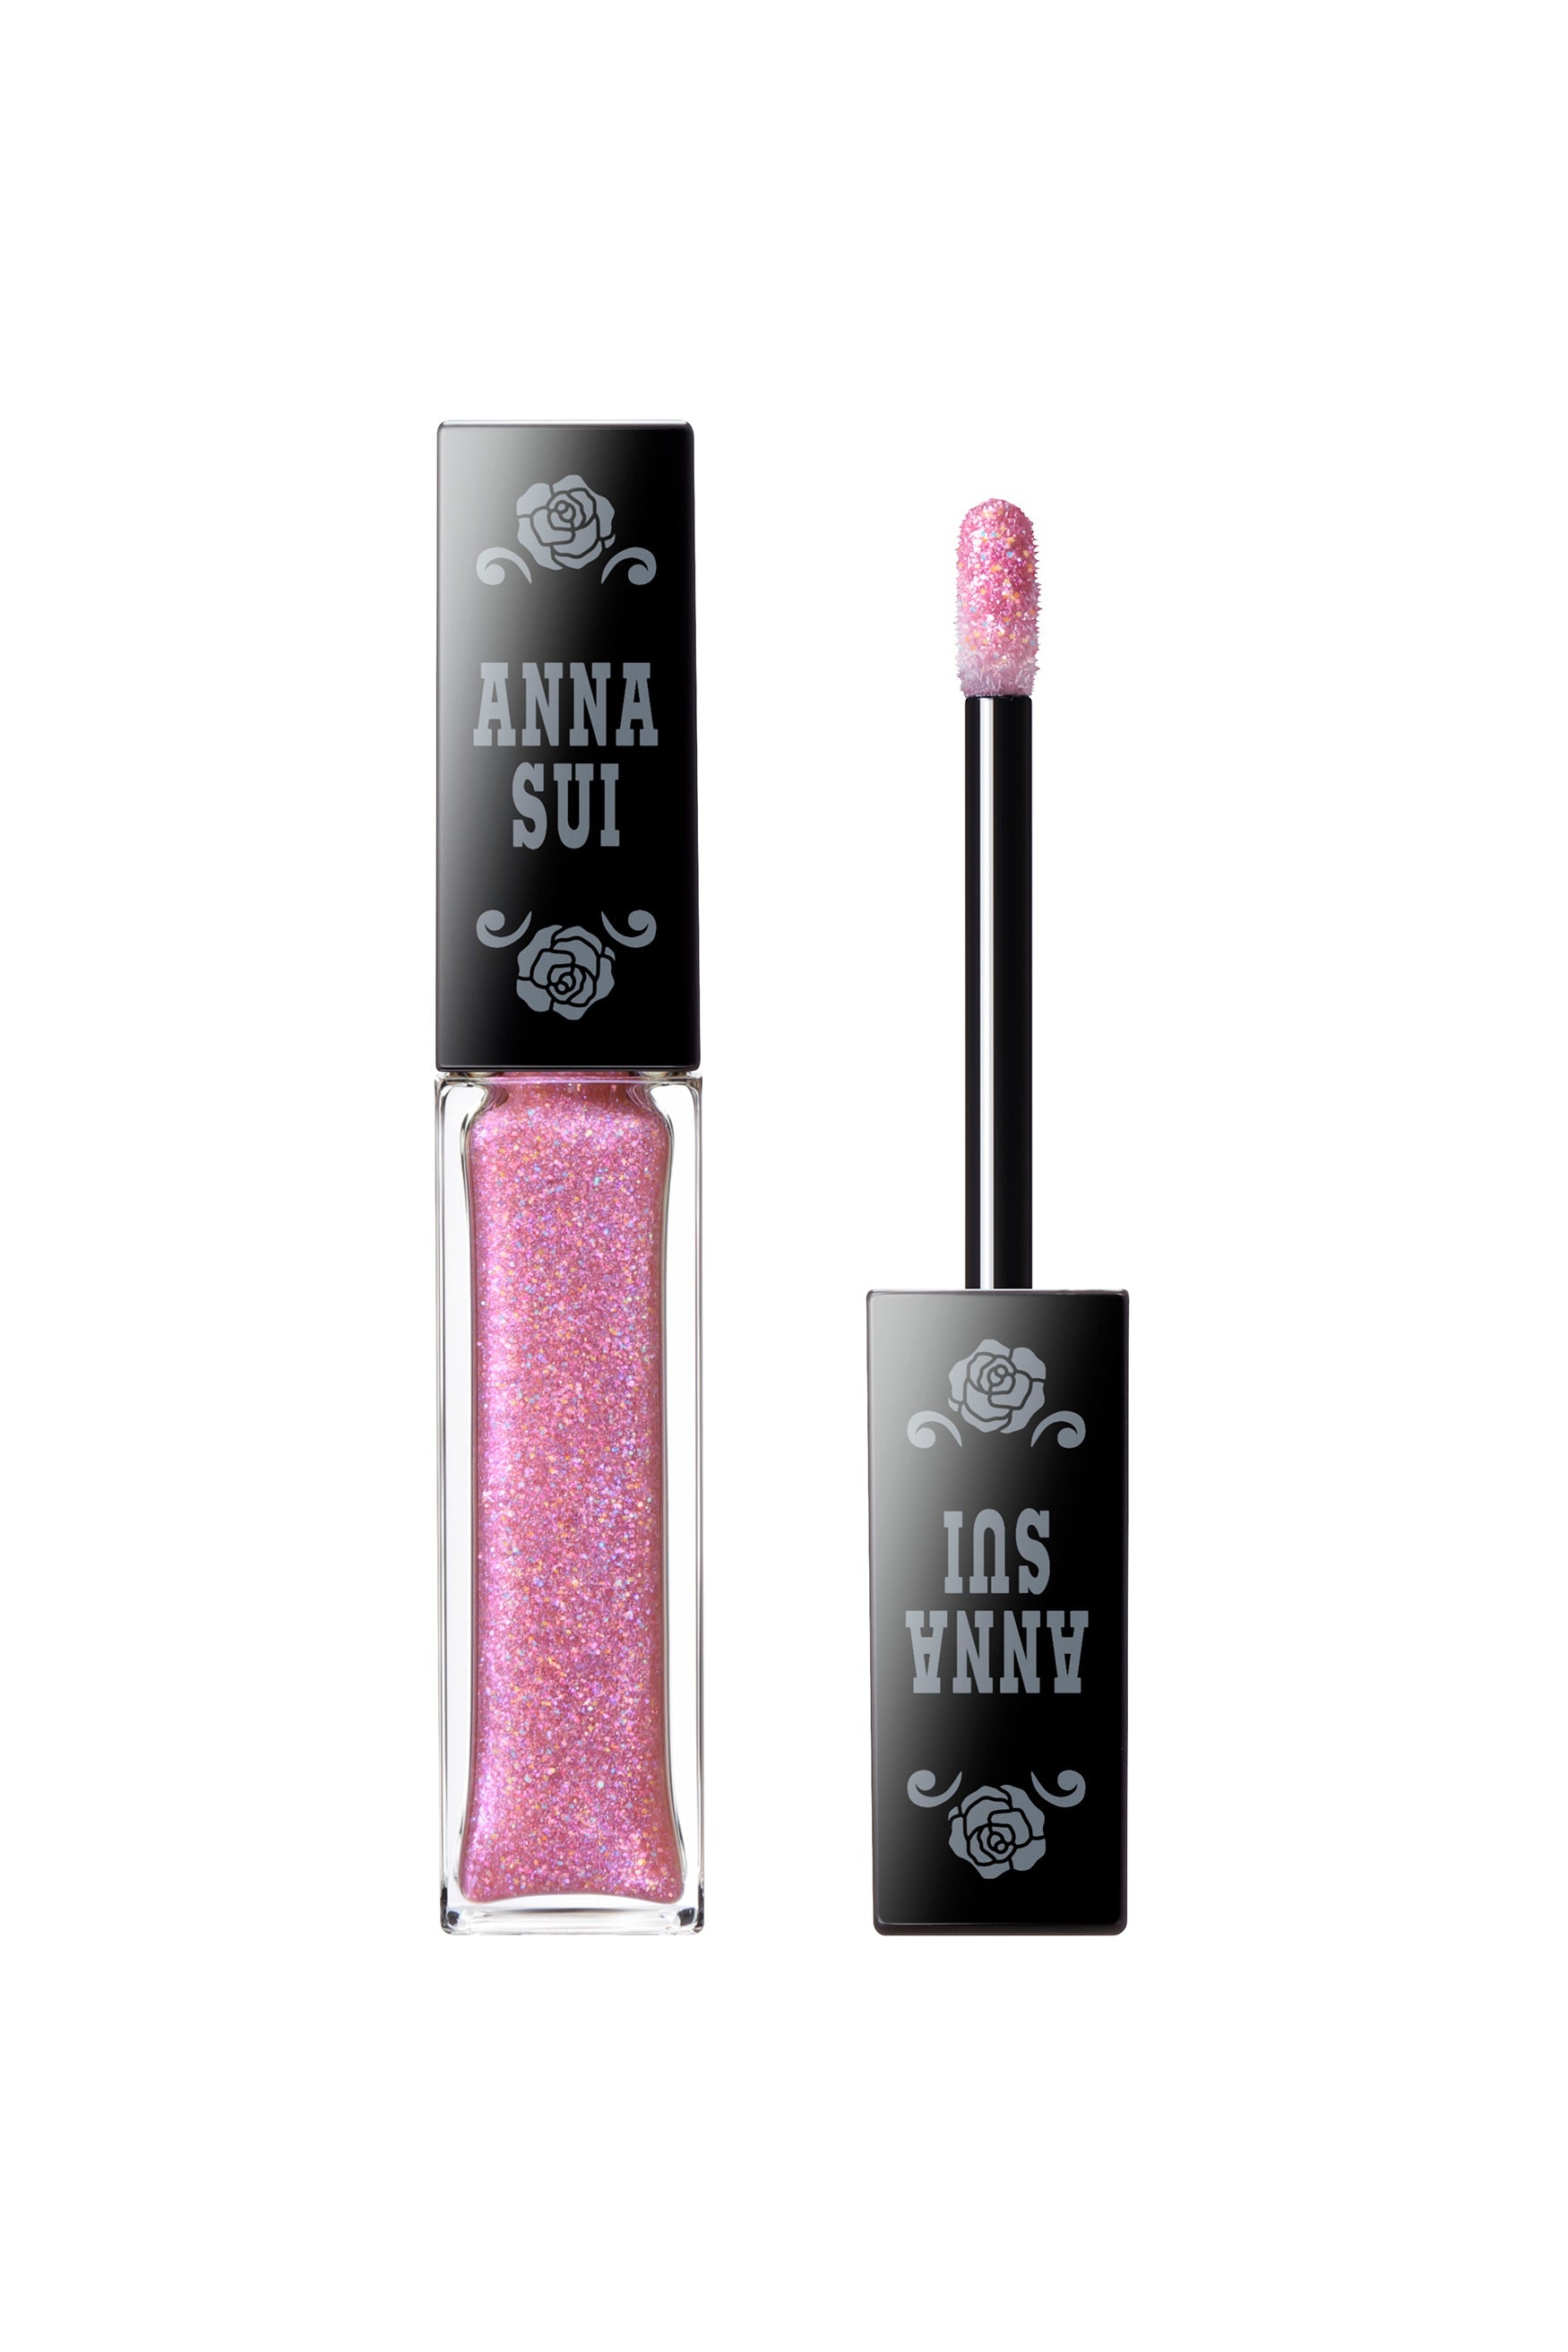 PINK PARADE, transparent bottle & applicator with Anna Sui label on the black top